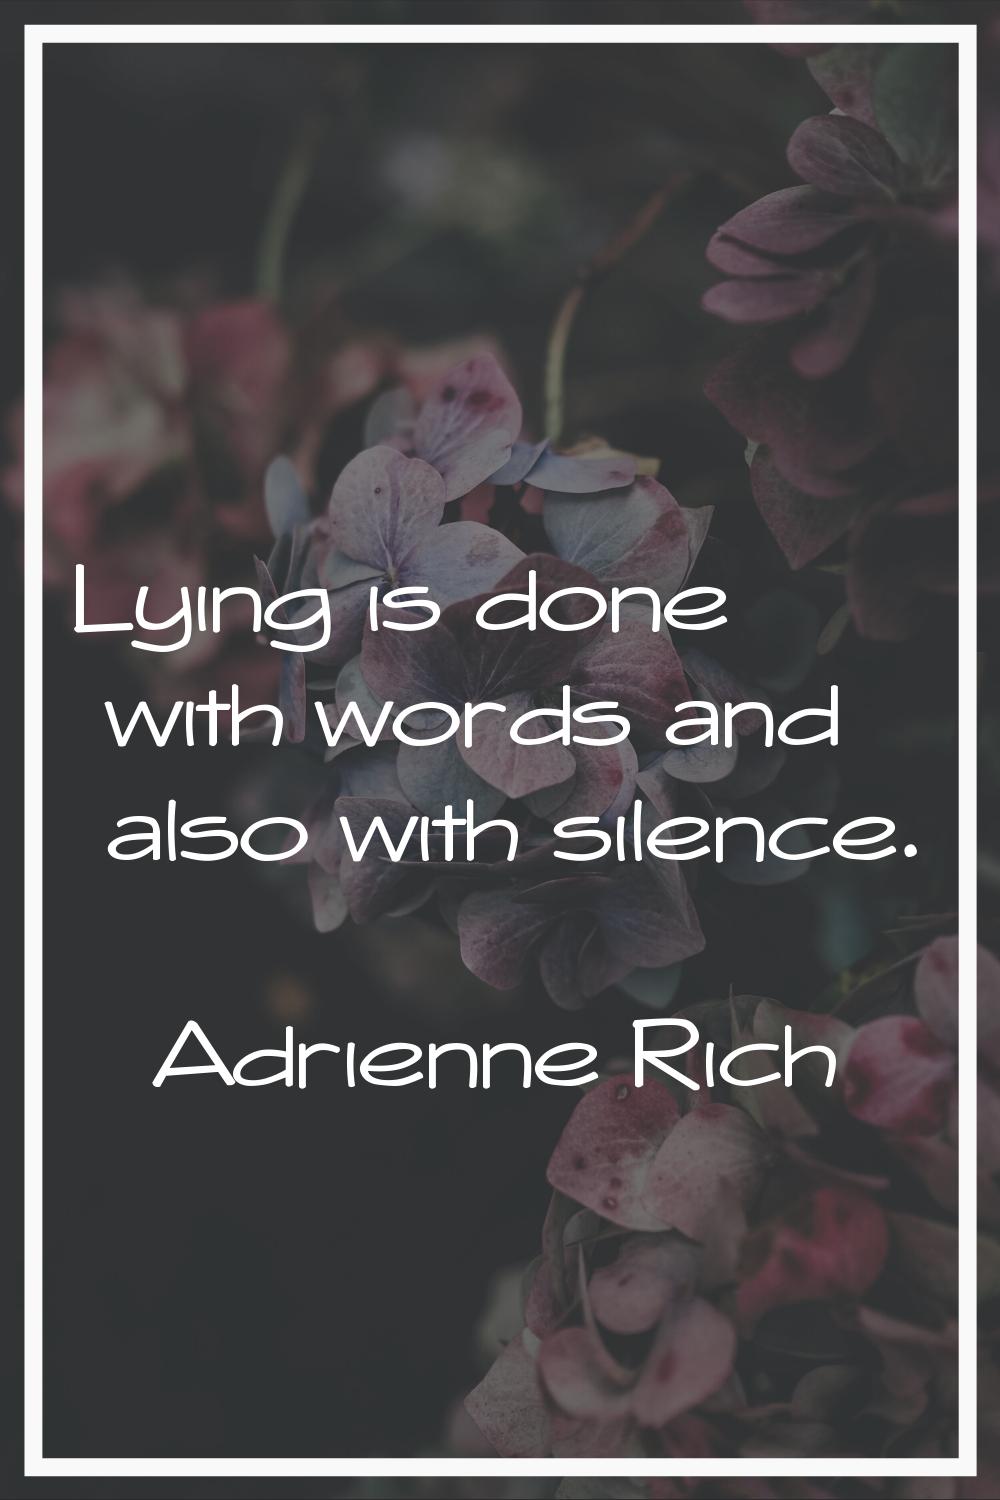 Lying is done with words and also with silence.